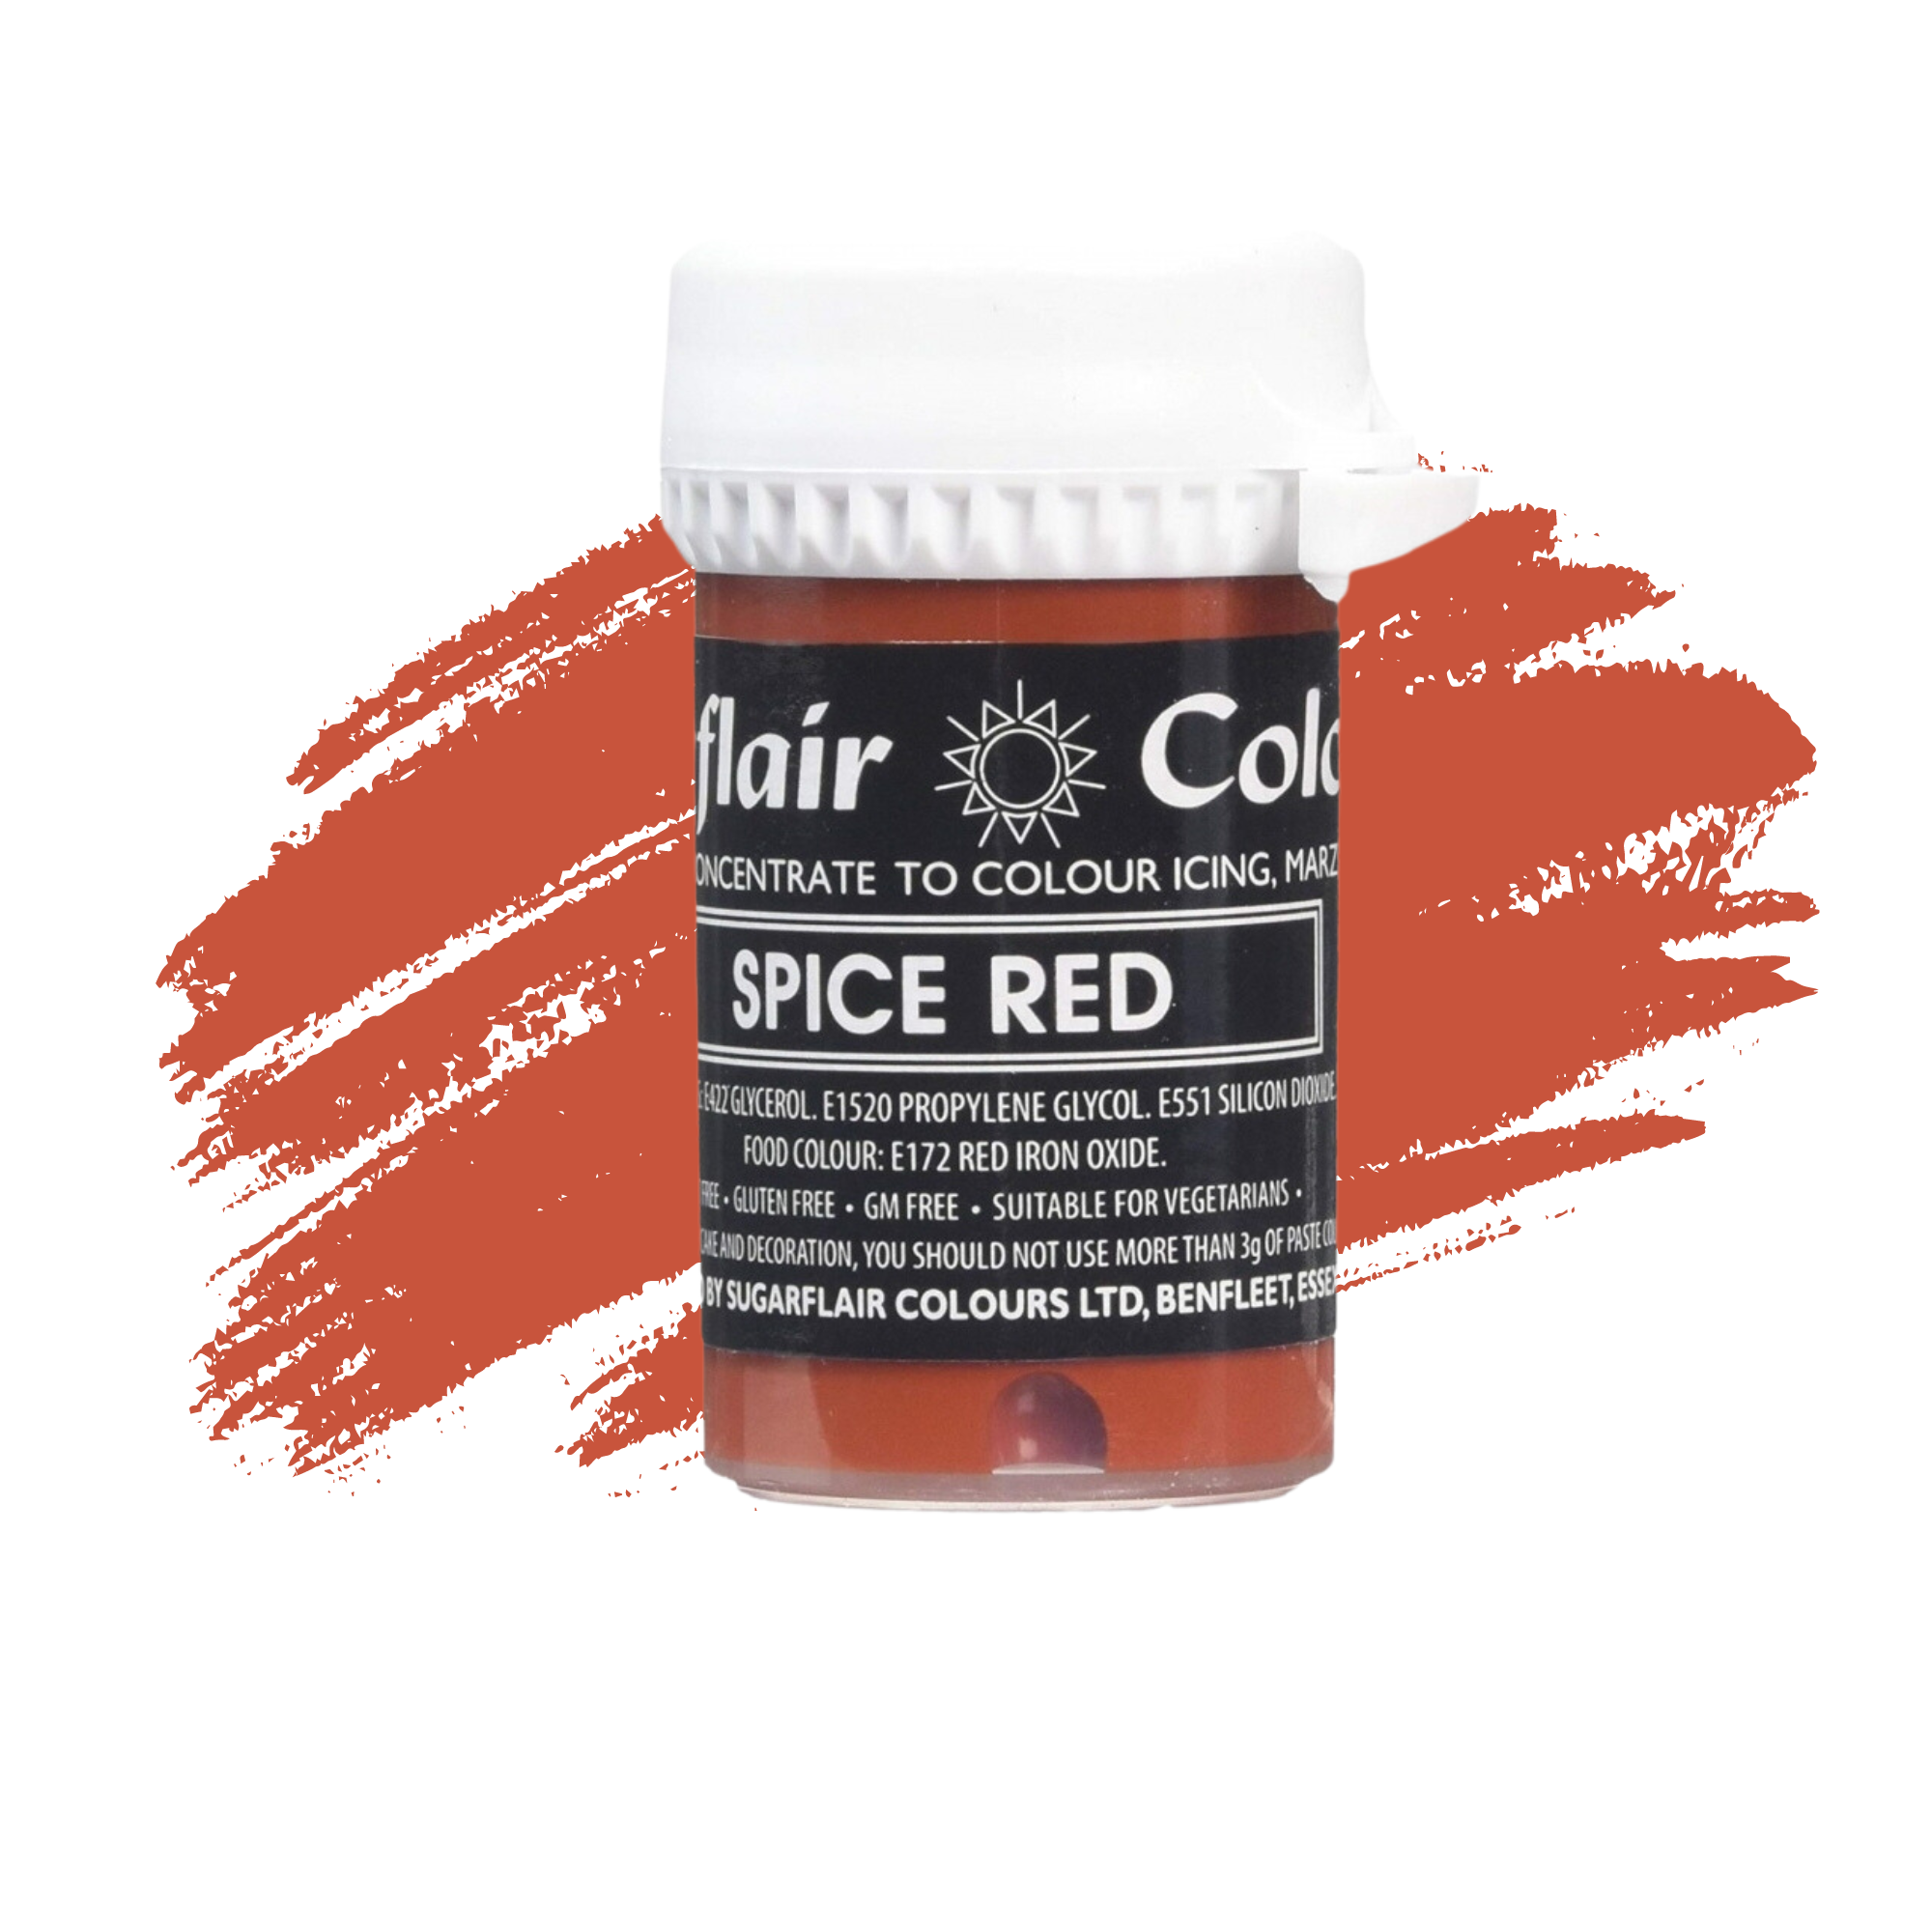 Sugarflair Paste Colours Concentrated Food Colouring - Pastel Spice Red - 25g